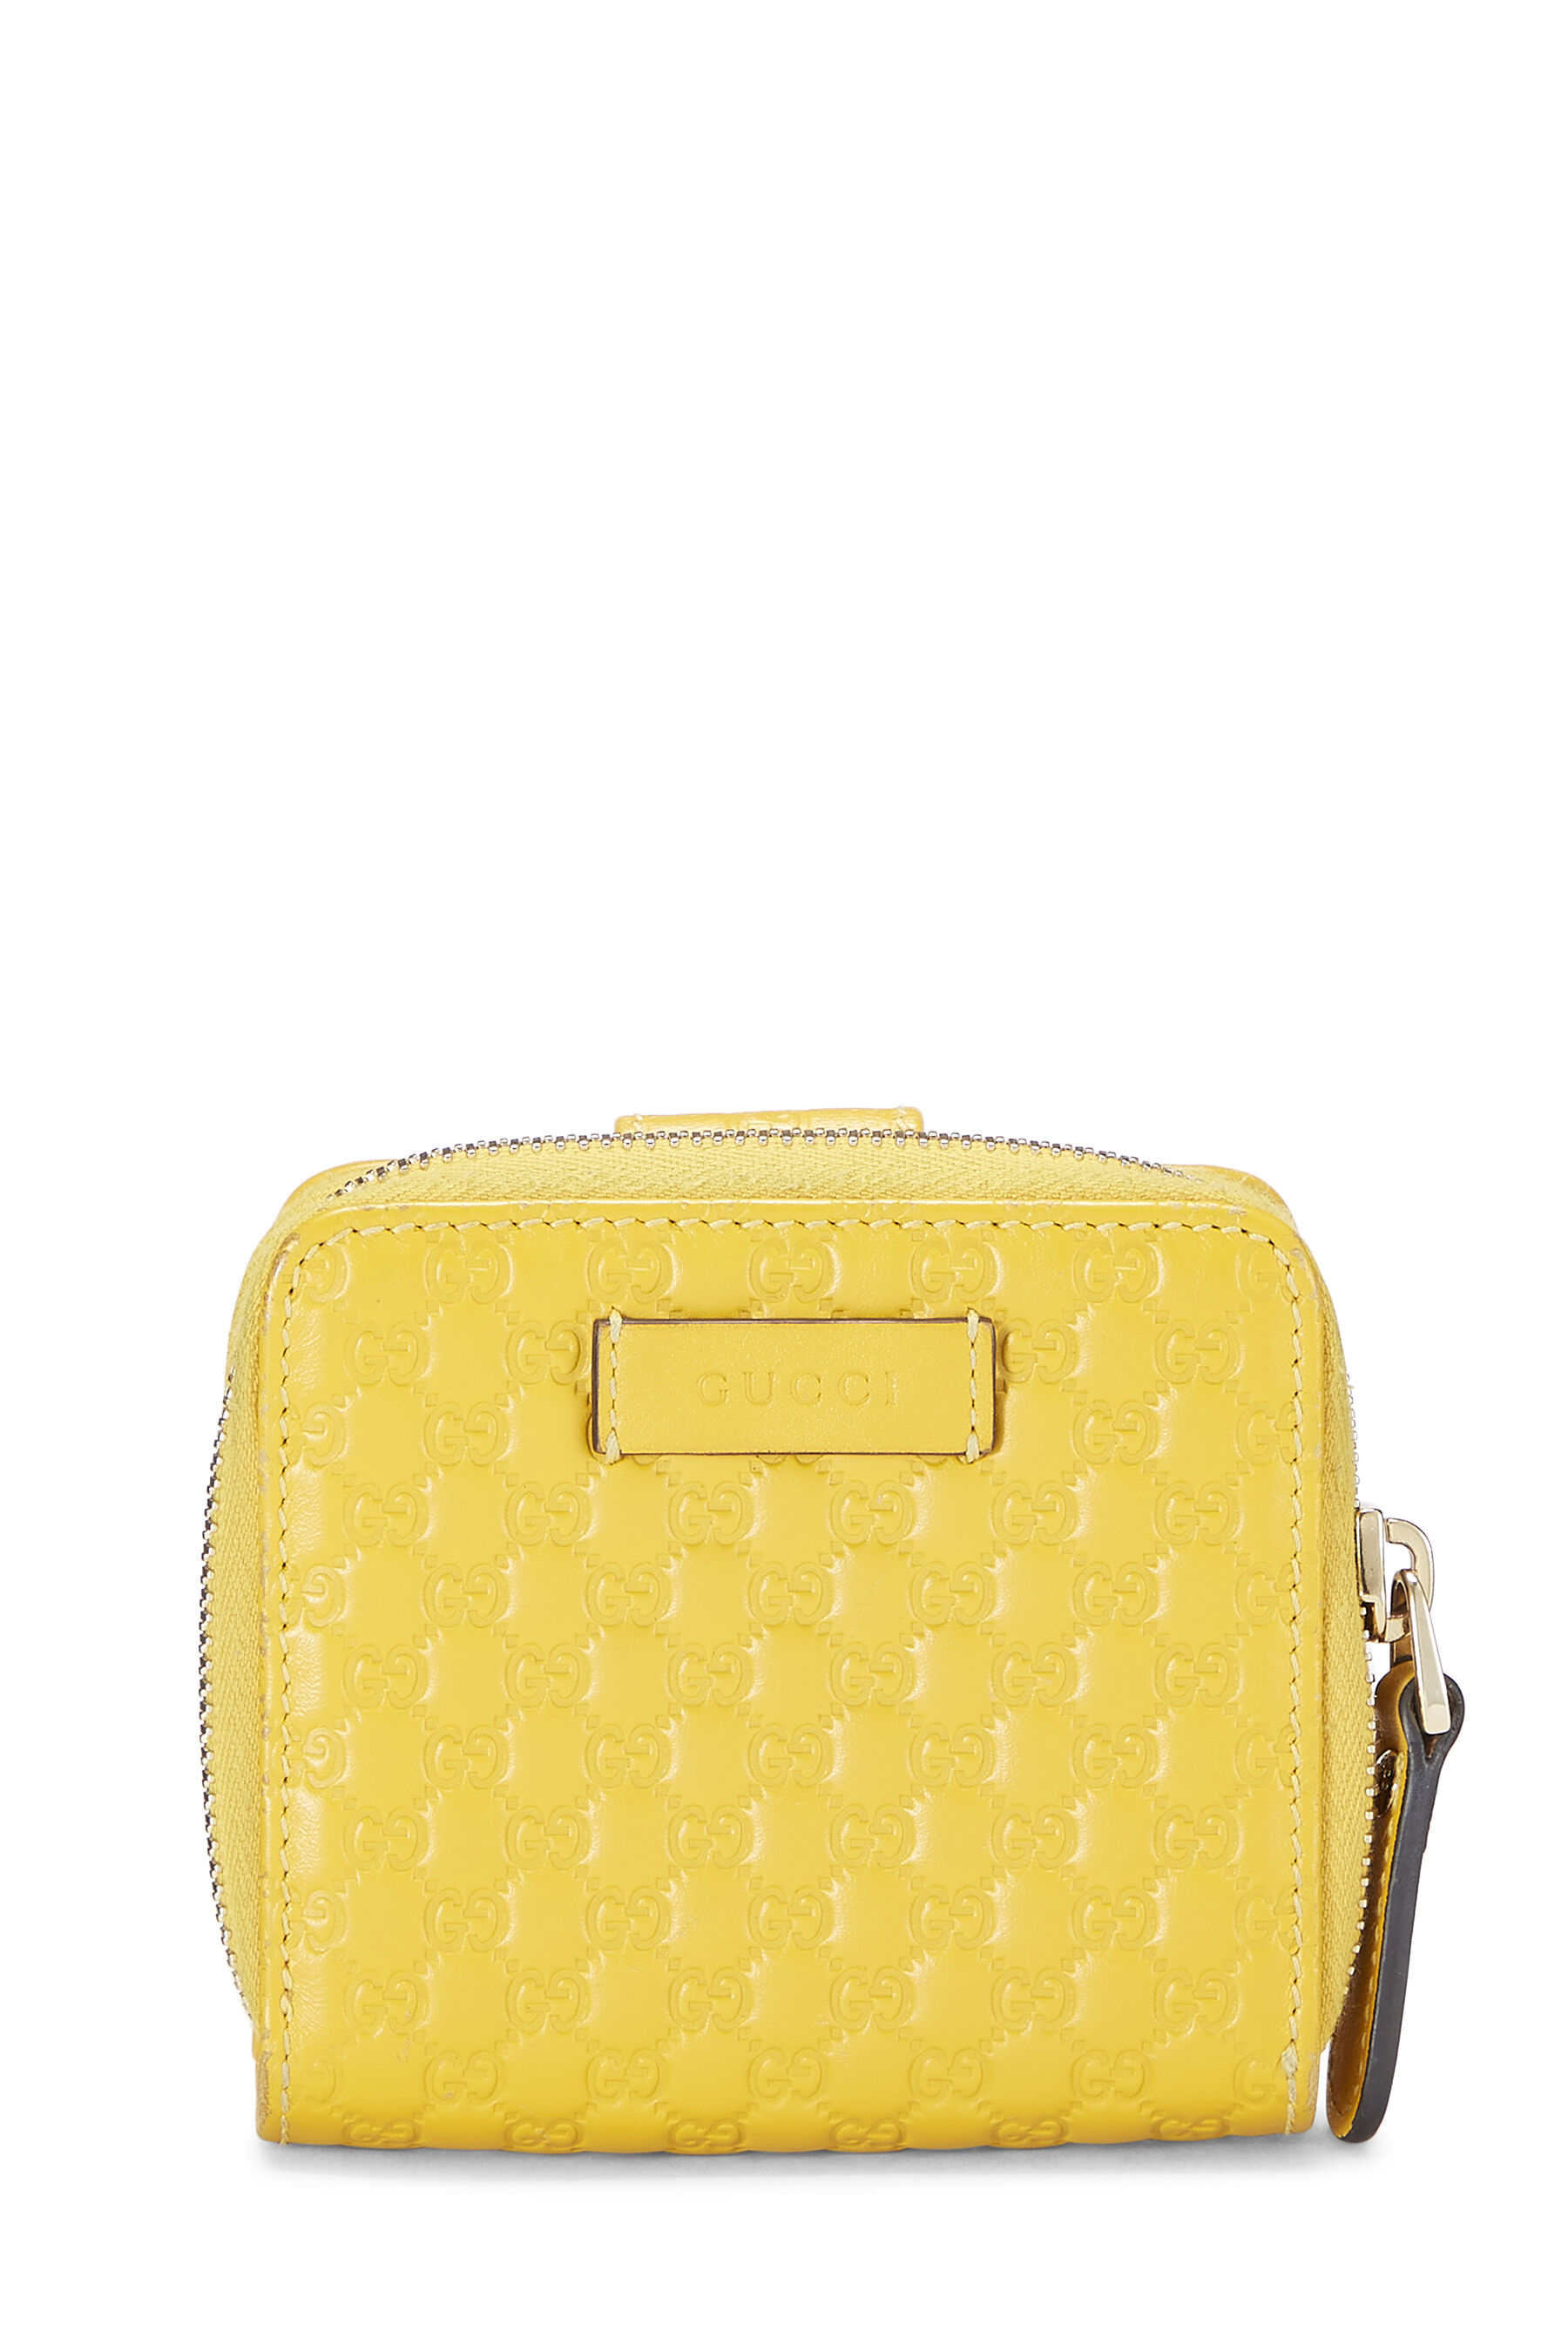 Pre-owned Gucci Yellow Microssima Leather Compact Wallet | ModeSens